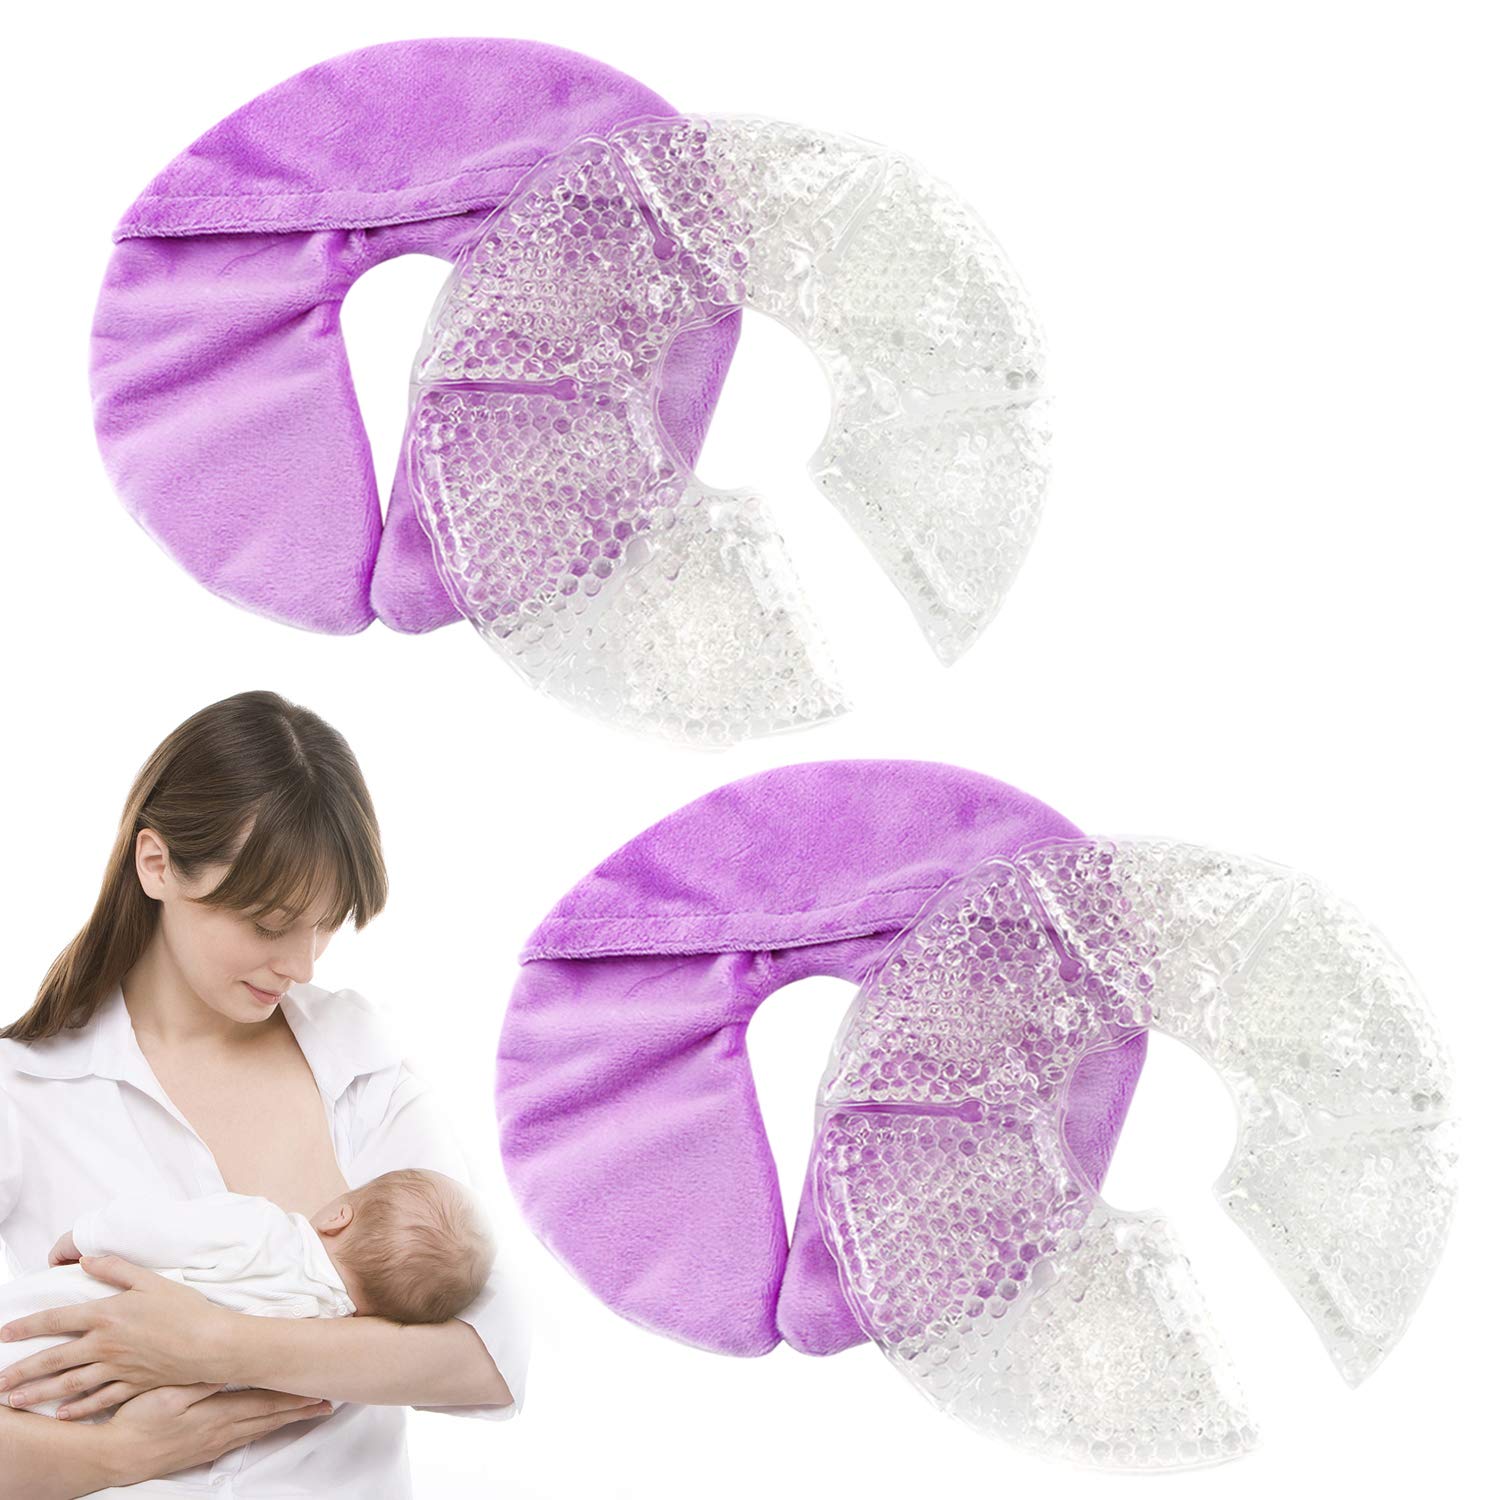 BPA Free Breast Therapy Packs Reusable Breast Ice Packs